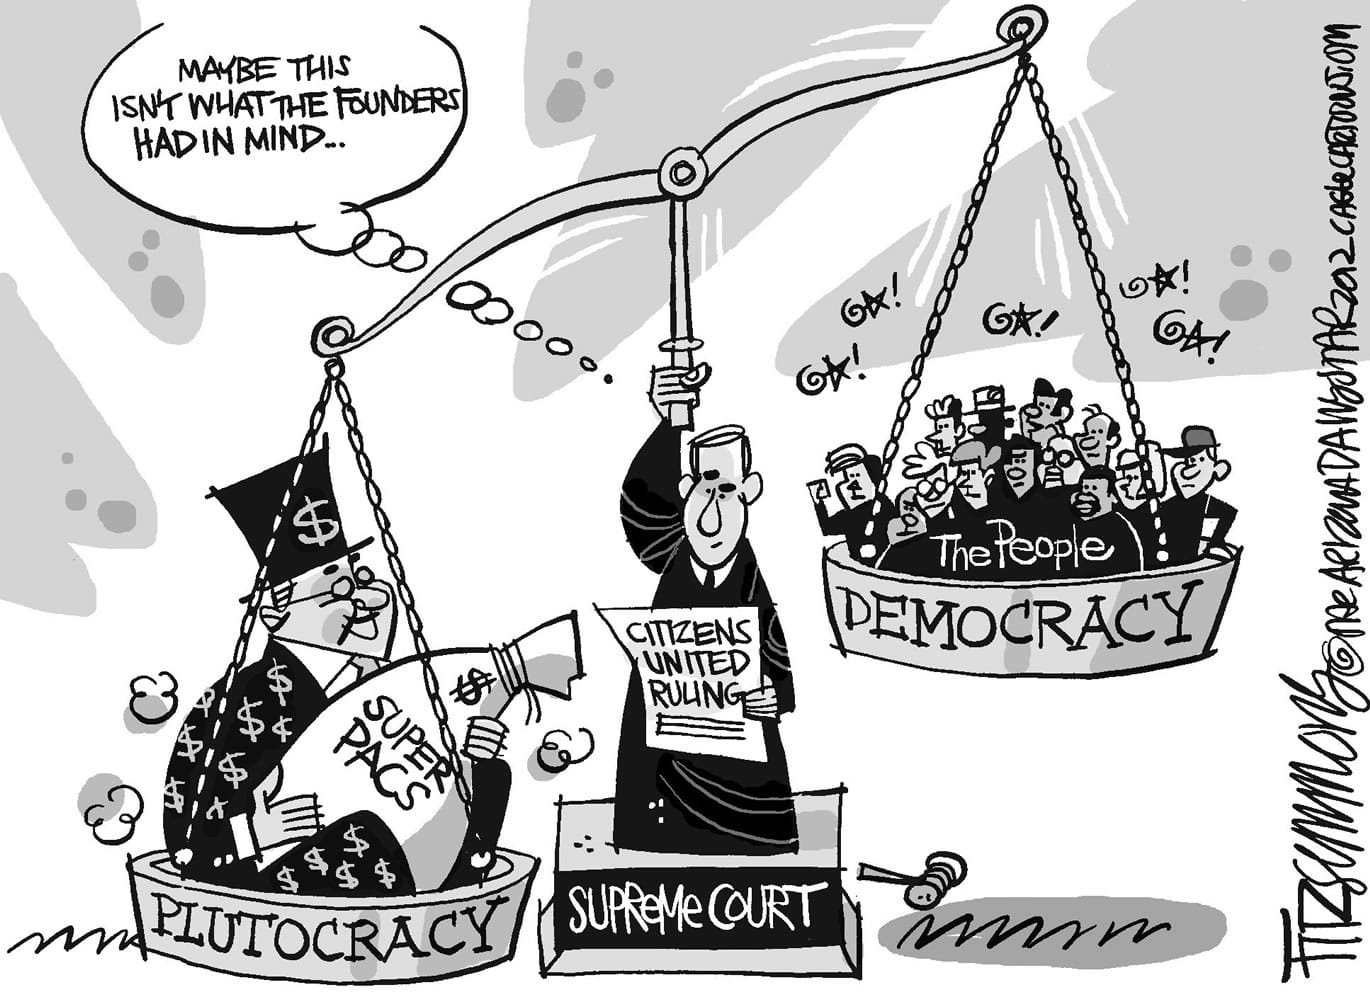 Editorial Cartoon: The Founders and Citizens United - The Columbian